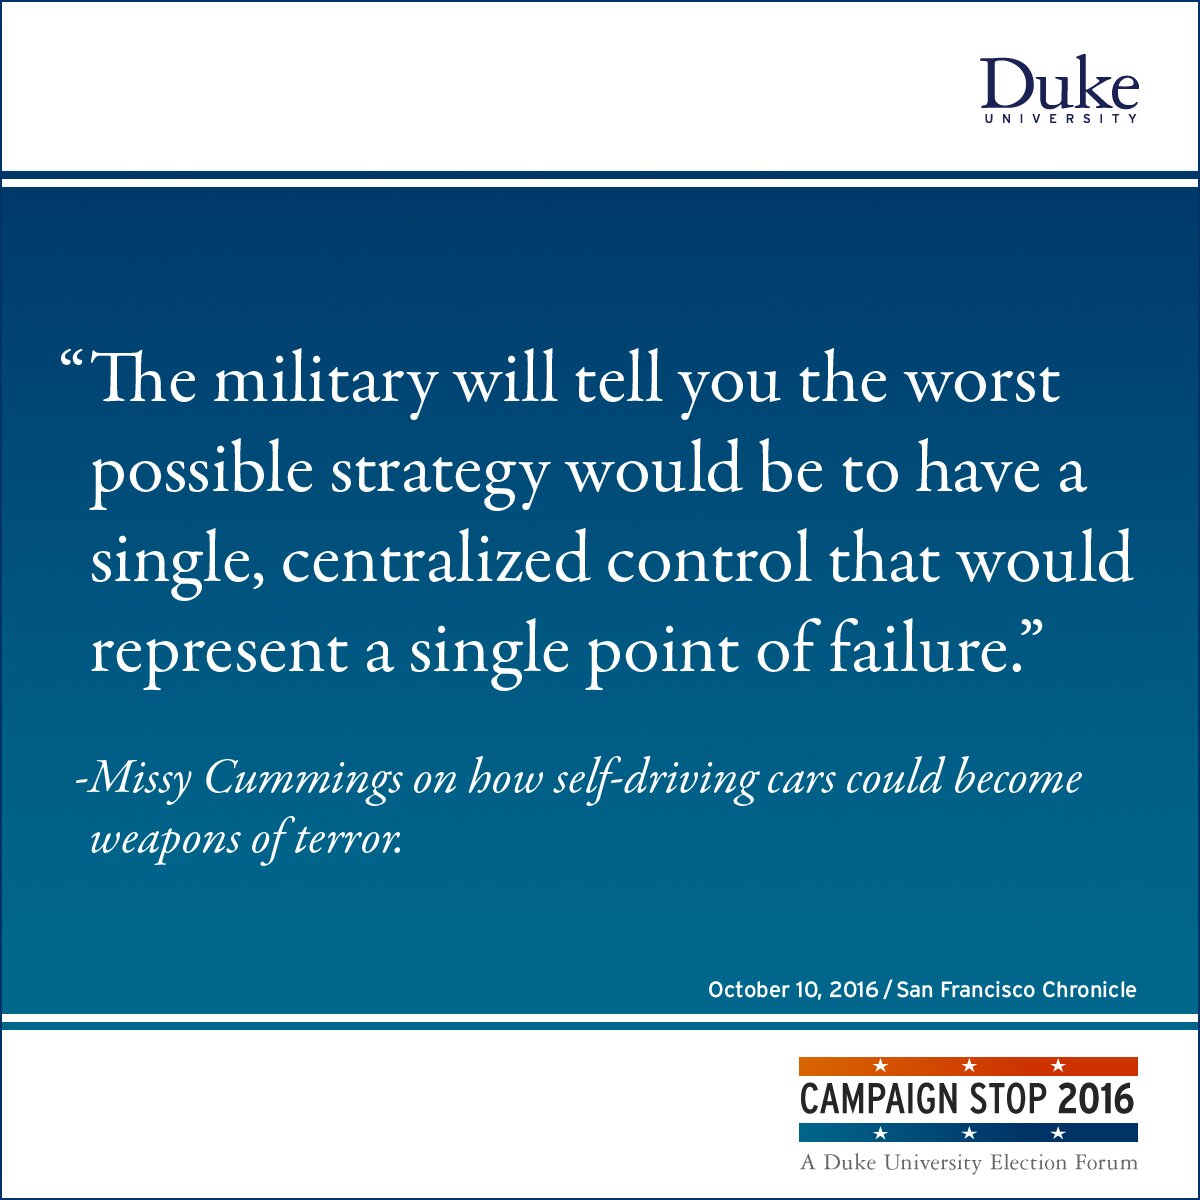 “The military will tell you the worst possible strategy would be to have a single, centralized control that would represent a single point of failure.” -Missy Cummings on how self-driving cars could become weapons of terror.